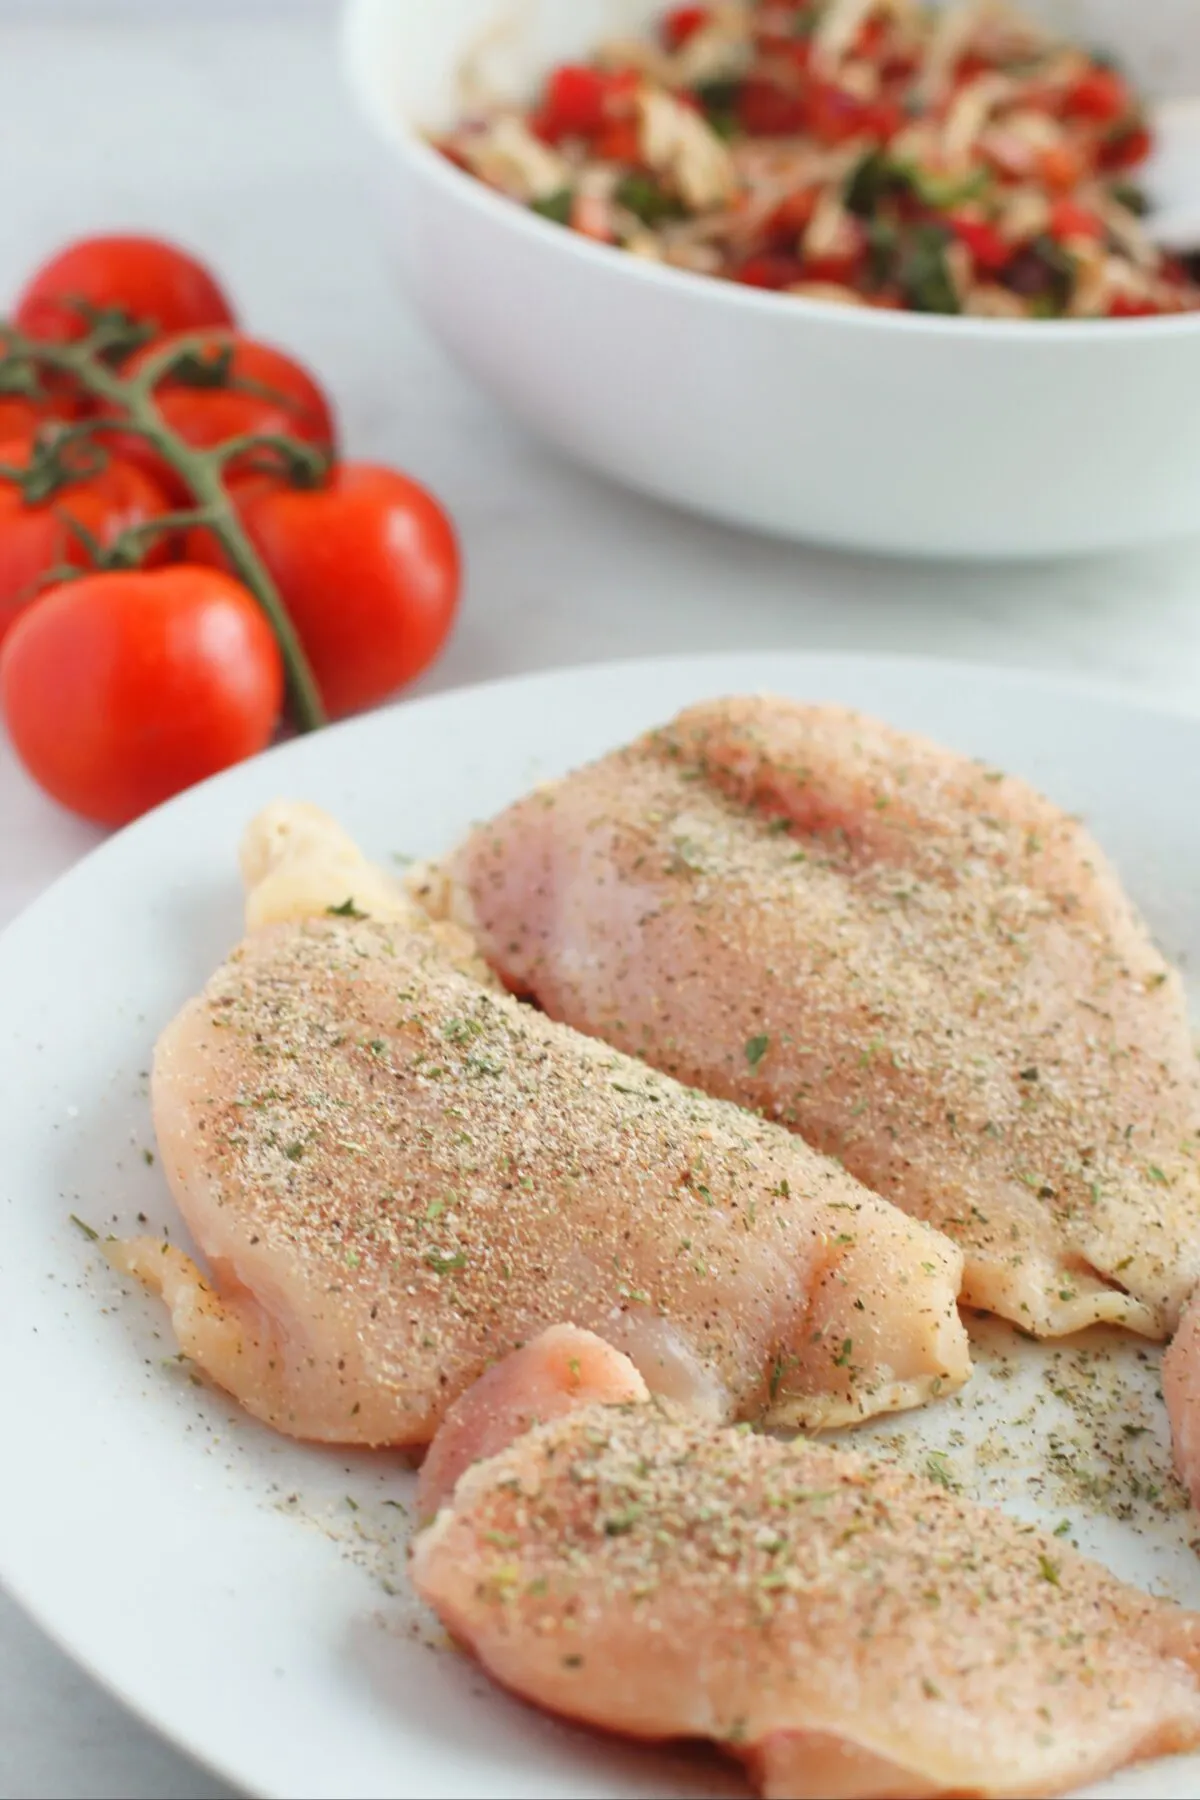 Raw chicken breasts with seasoning.